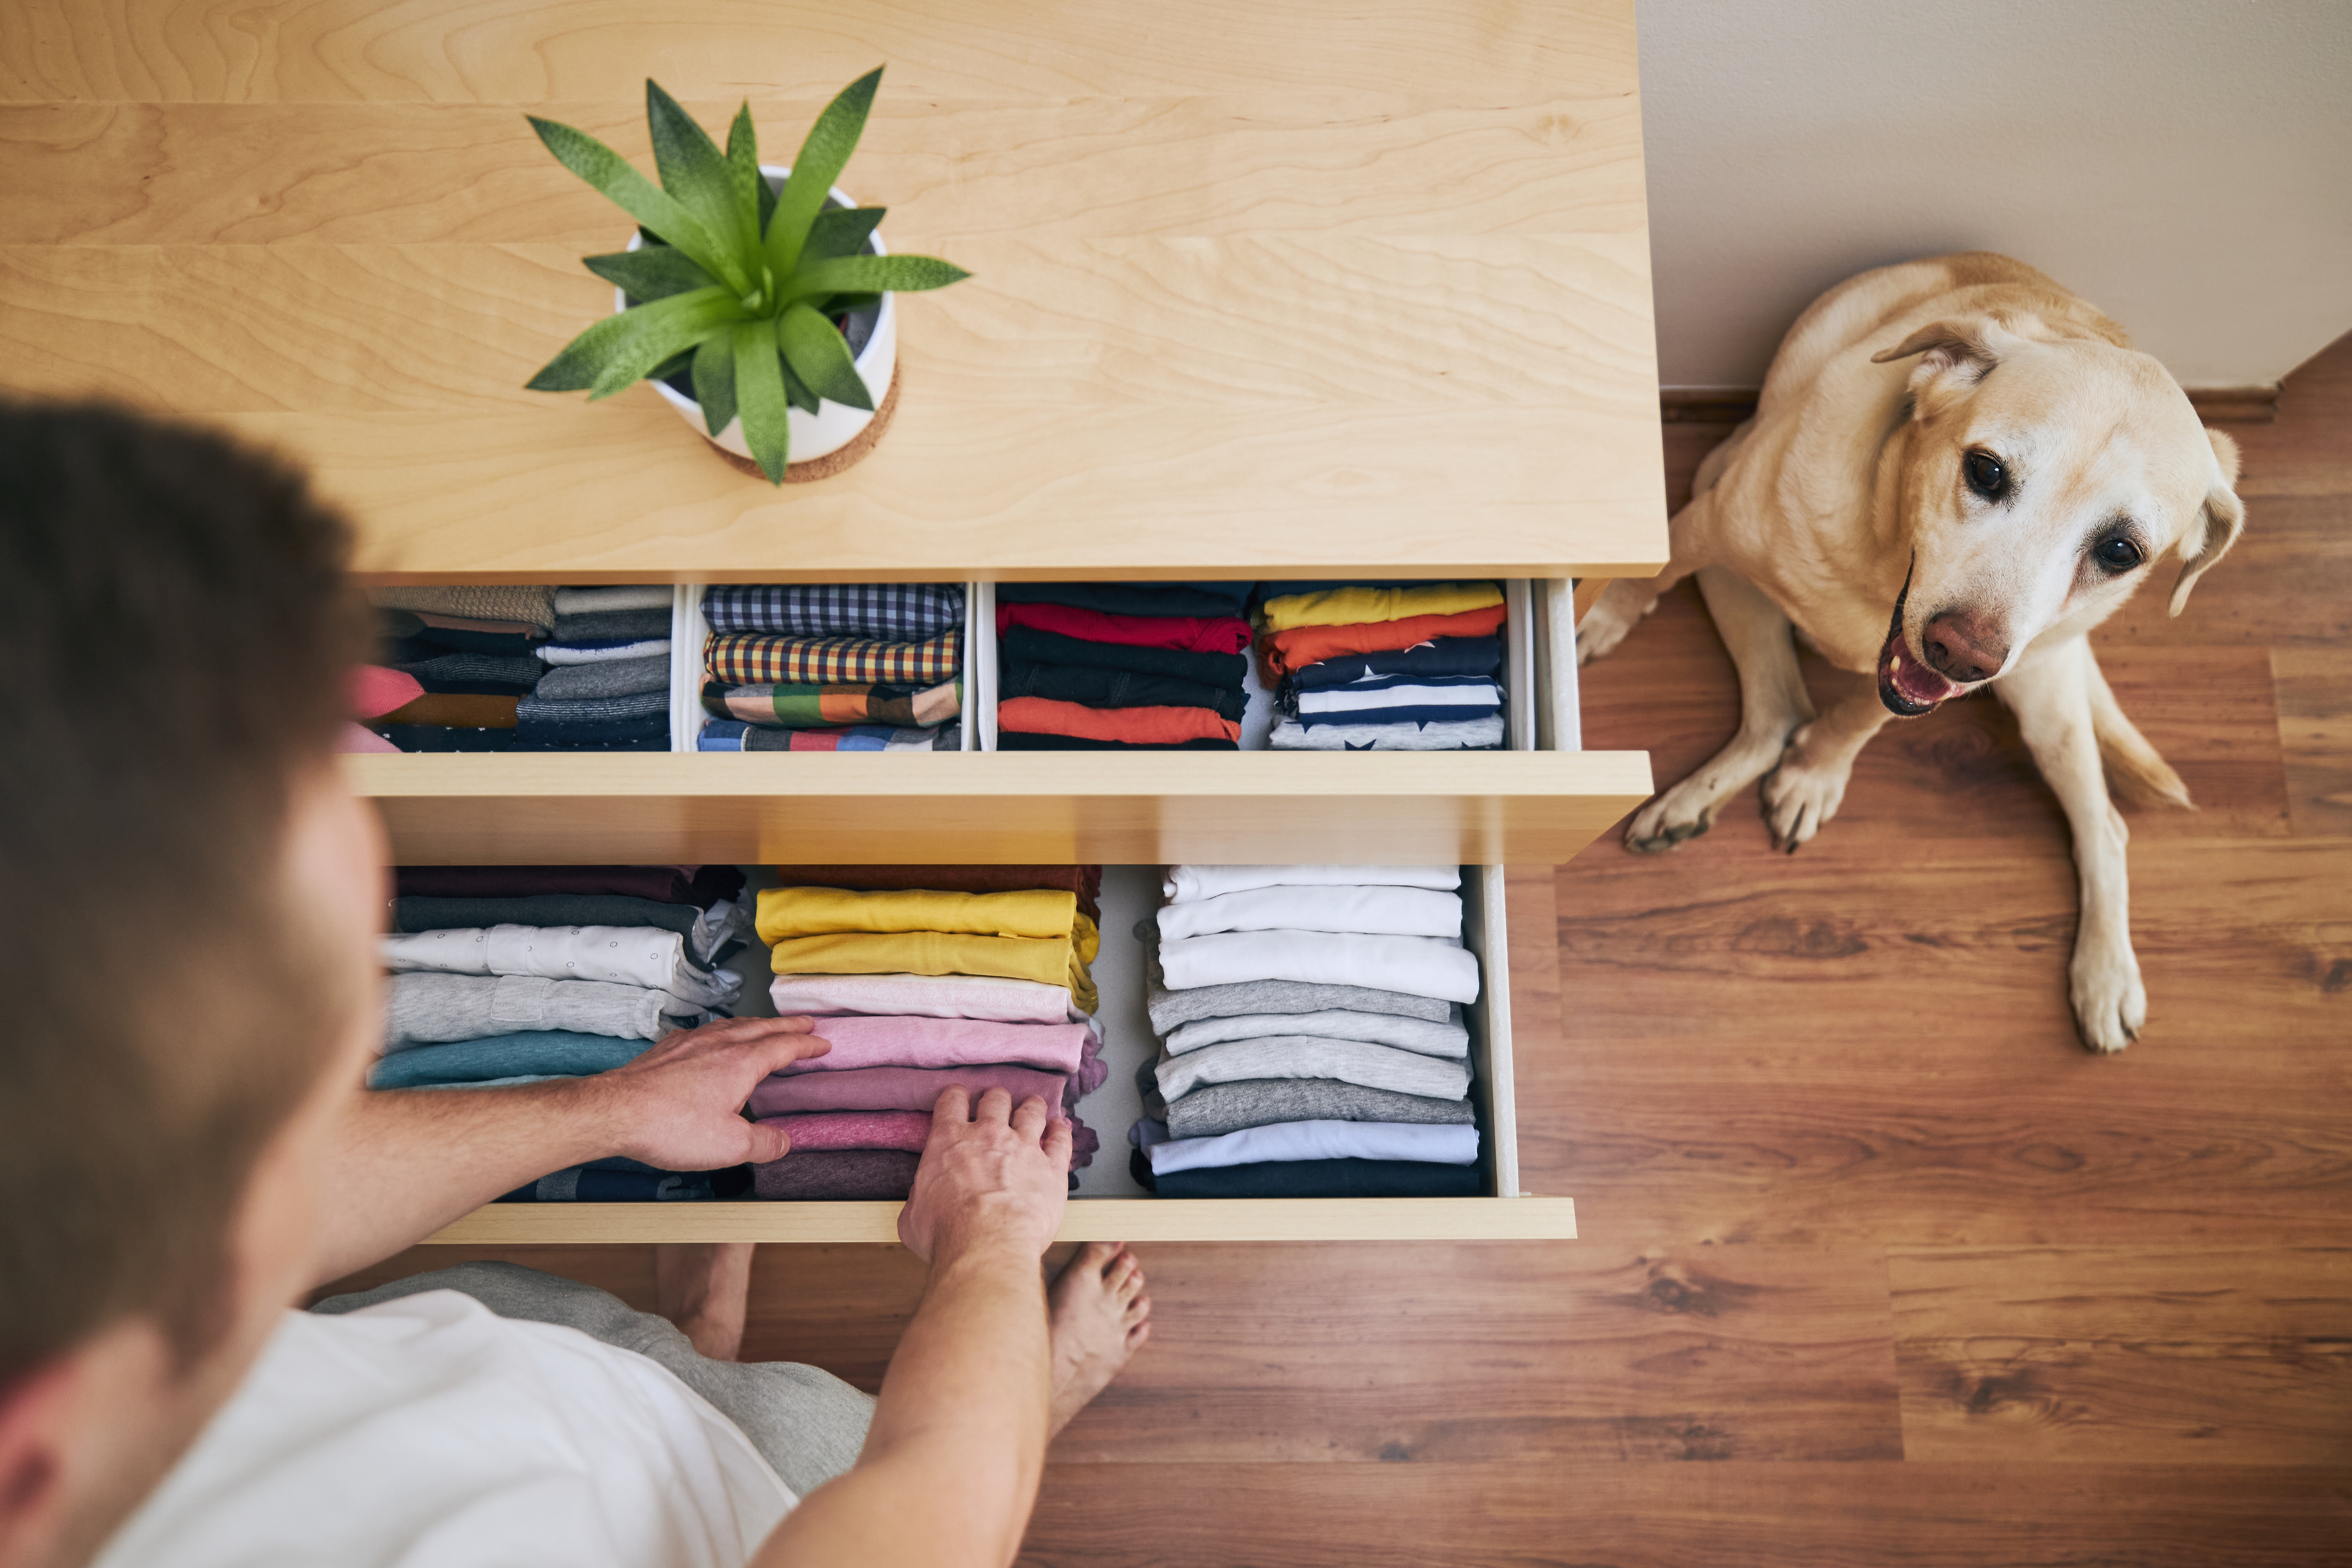 Organizing and cleaning home